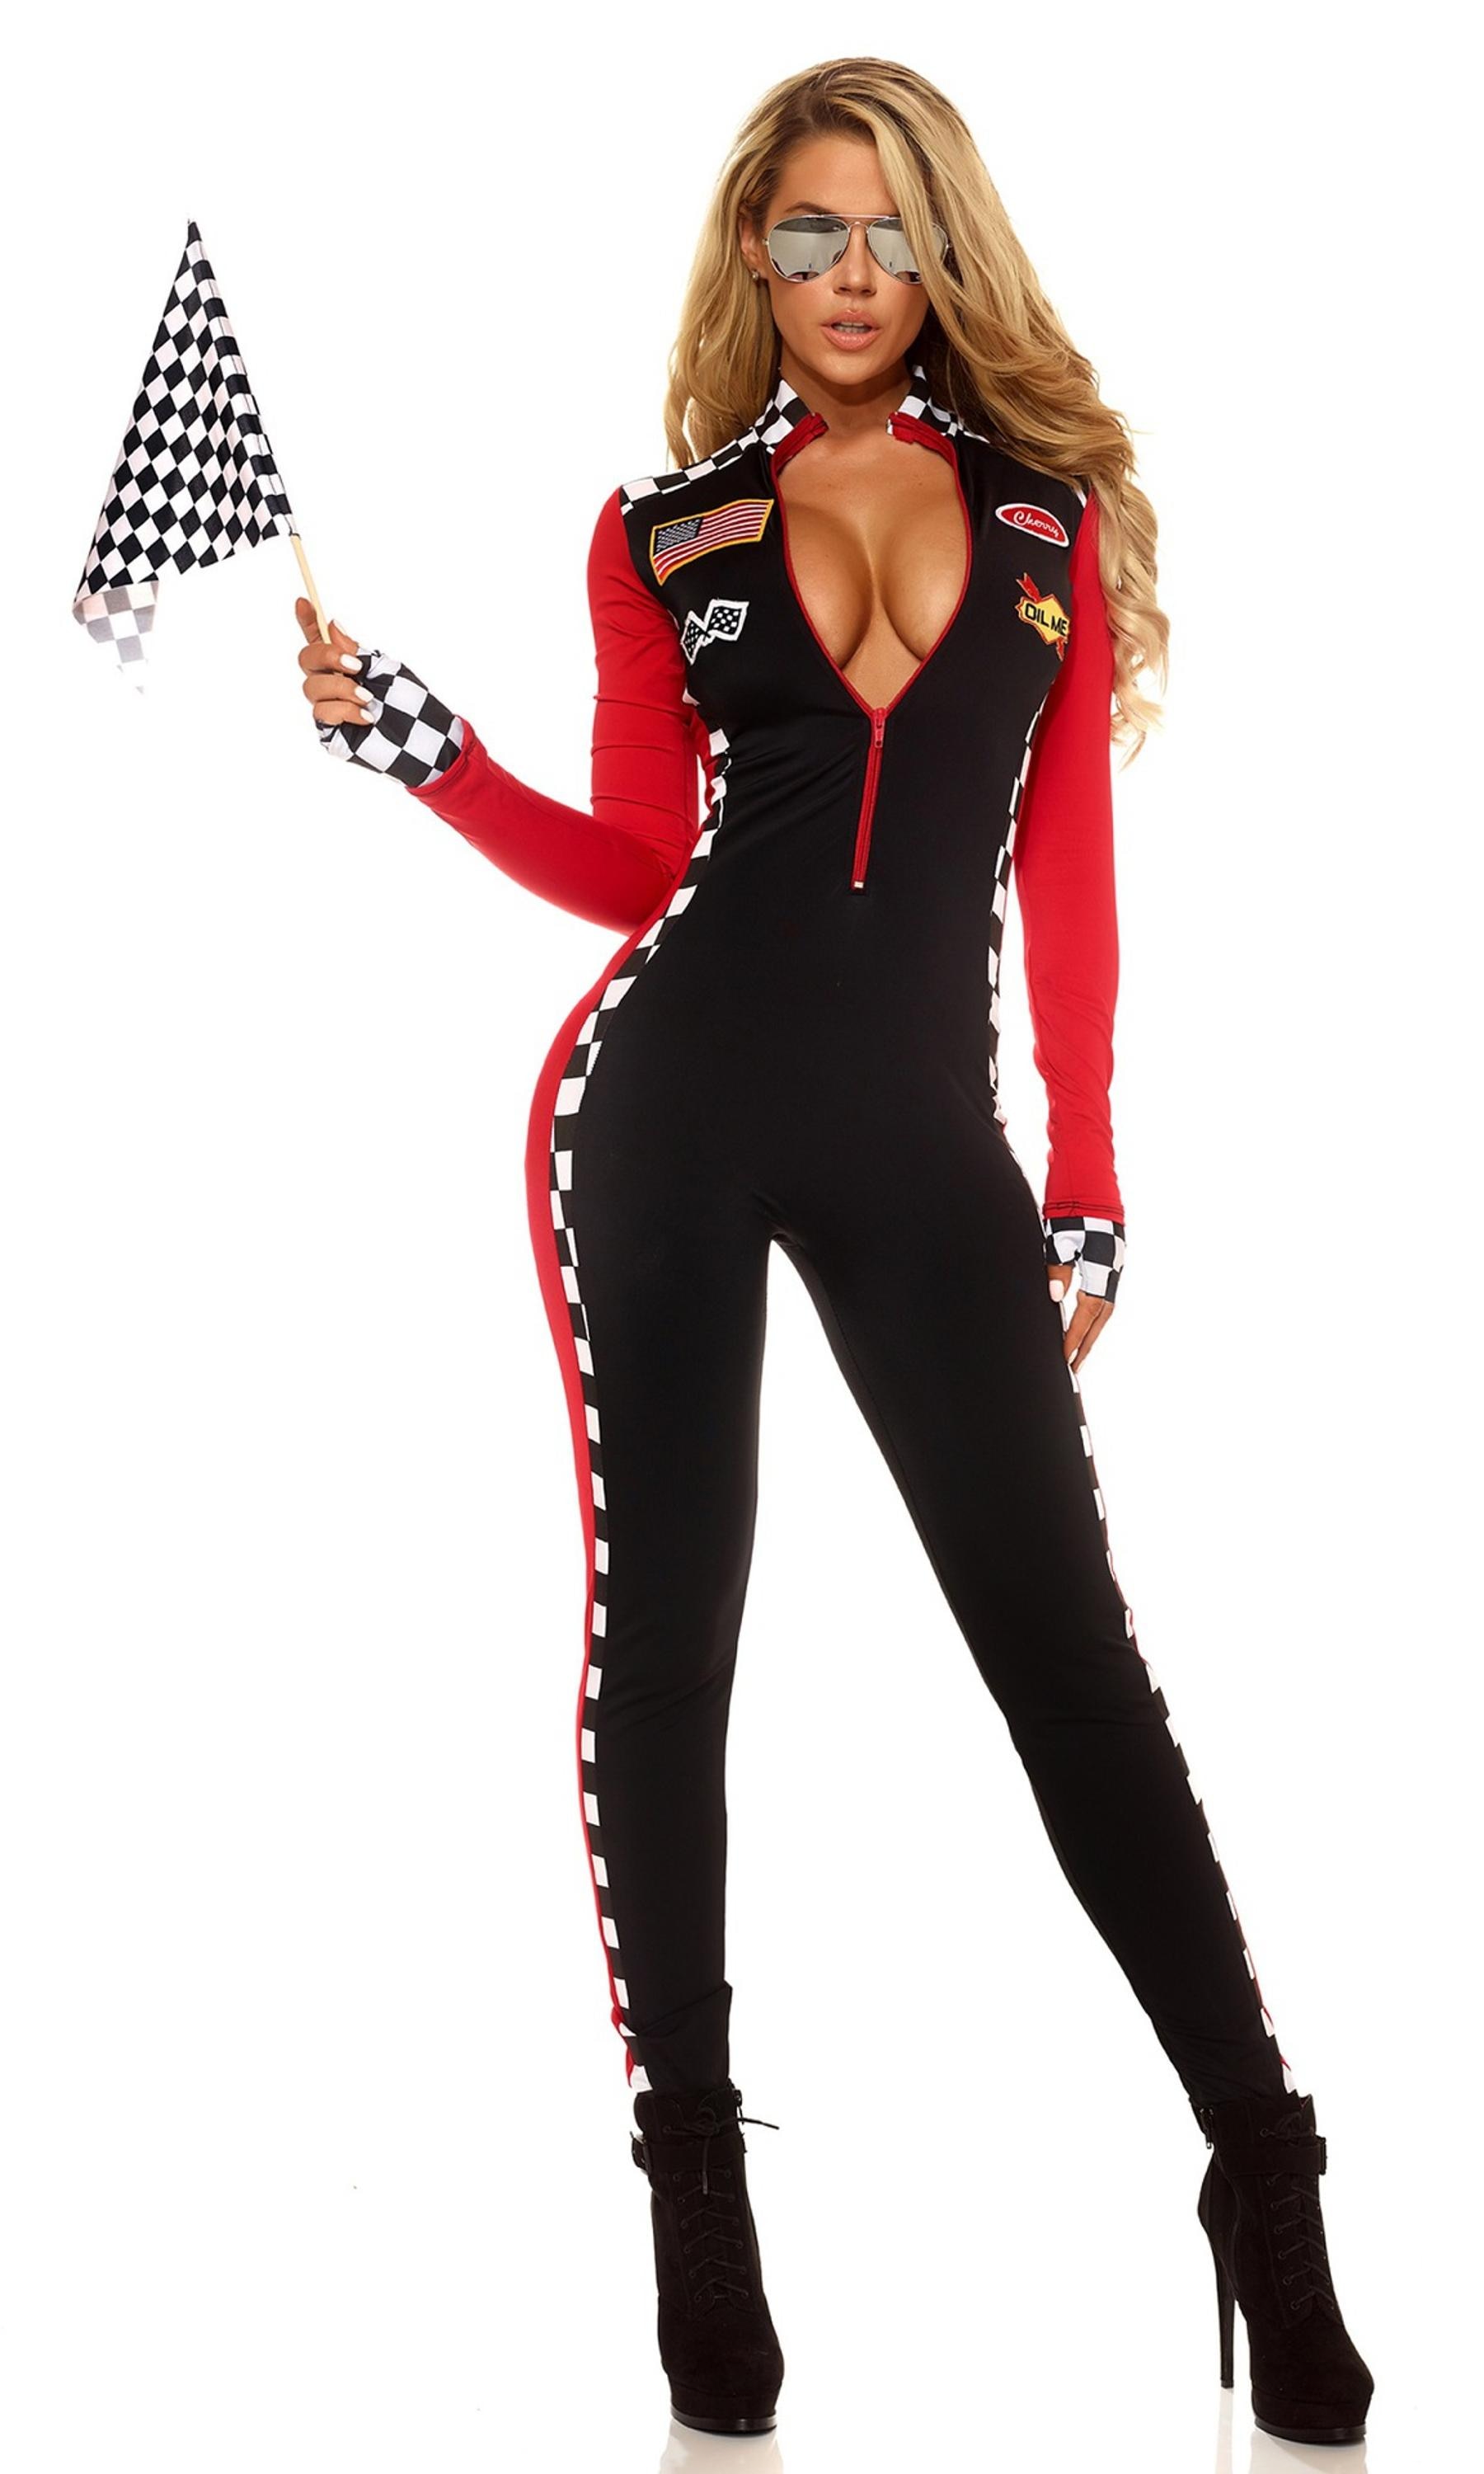 Sexy Ladies Racing Girl Costume Race Car Driver Outfit Long Sleeves Plaid Jumpsuit Dreamgirl Fancy Dress